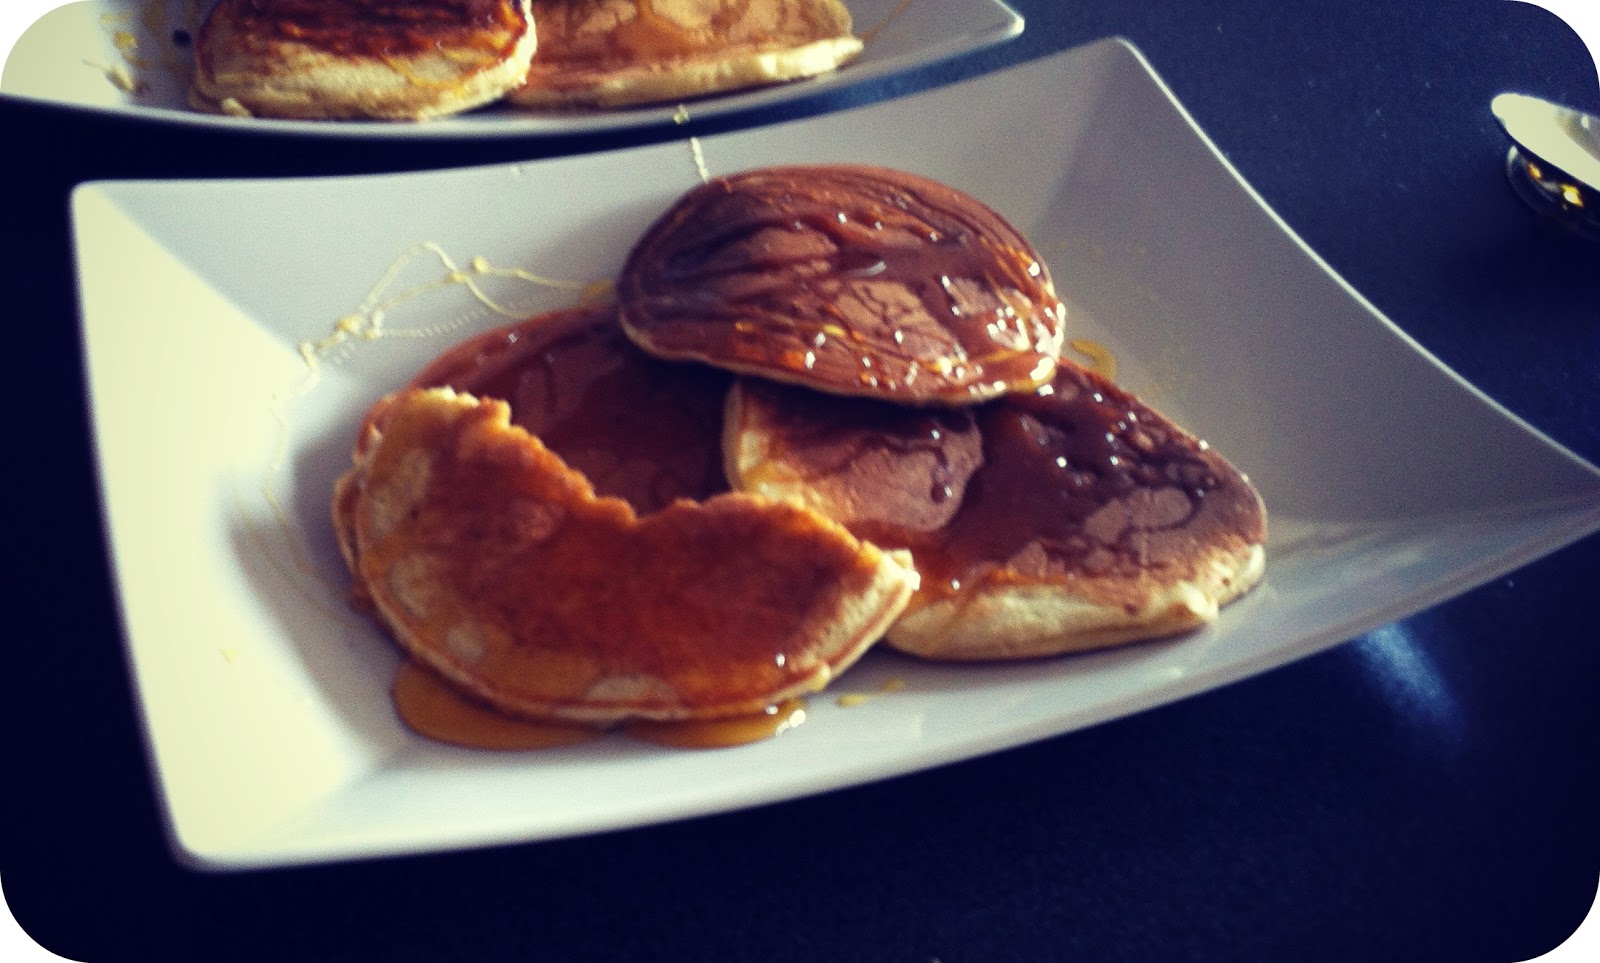 Fluffy Blog.: American bbc  Lifestyle pancakes Pancakes make to Beauty, how and Travel american Recipe: